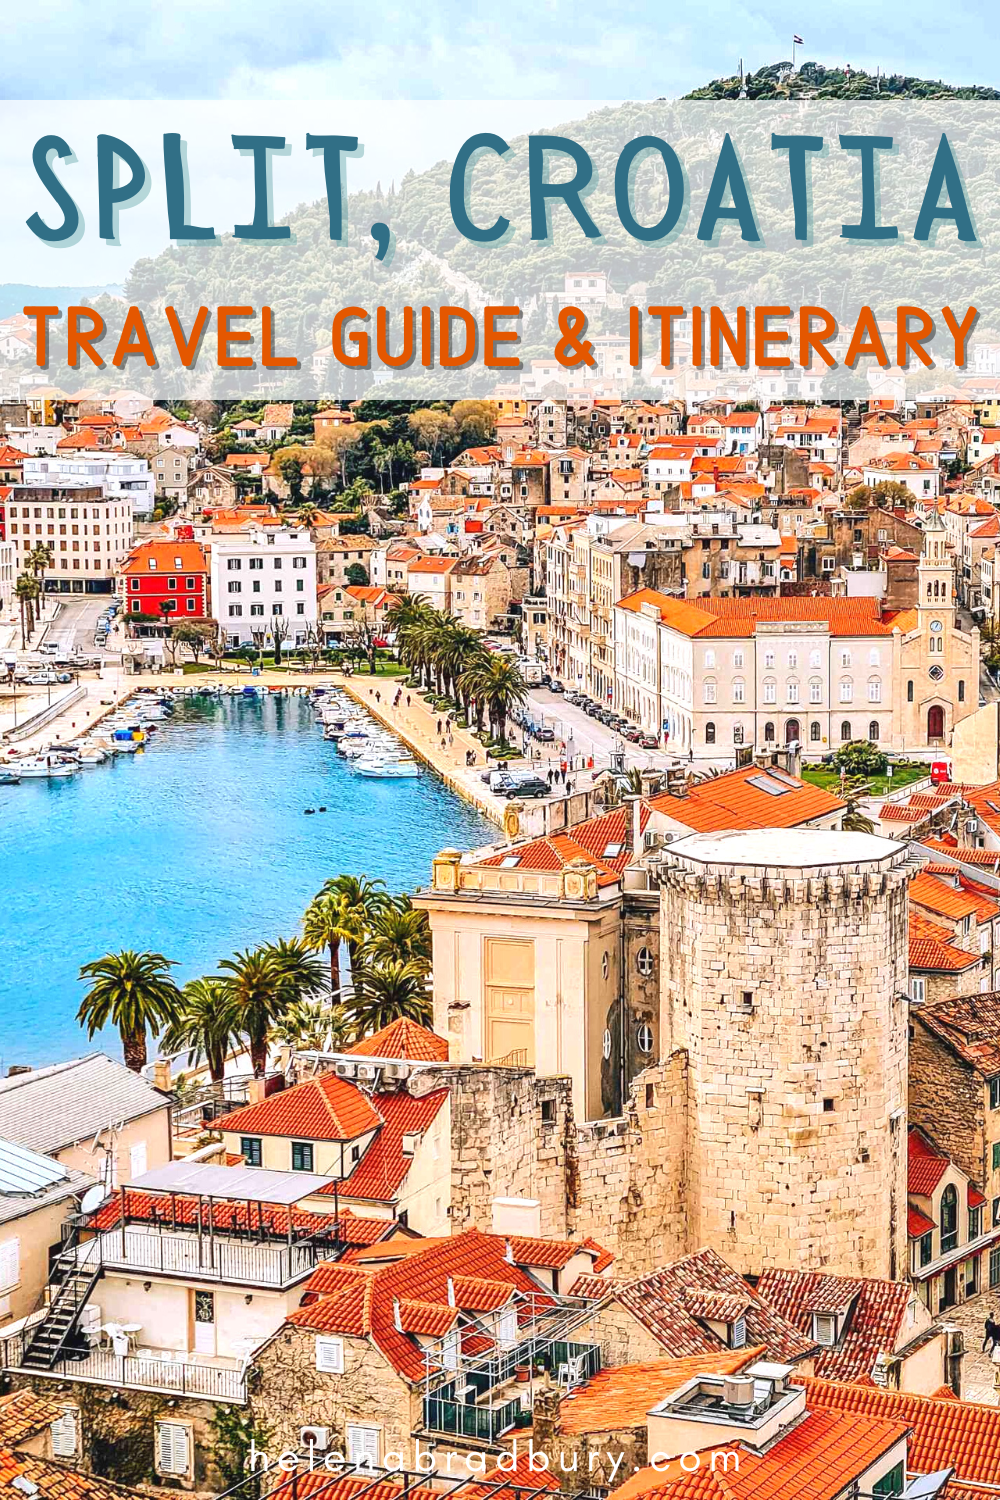 Plan how to spend 3 days in Split, Croatia with this Split itinerary covering the best island tours, beaches, day trips and sights to see. | split croatia itinerary | split croatia things to do in | split croatia guide | split croatia travel guide